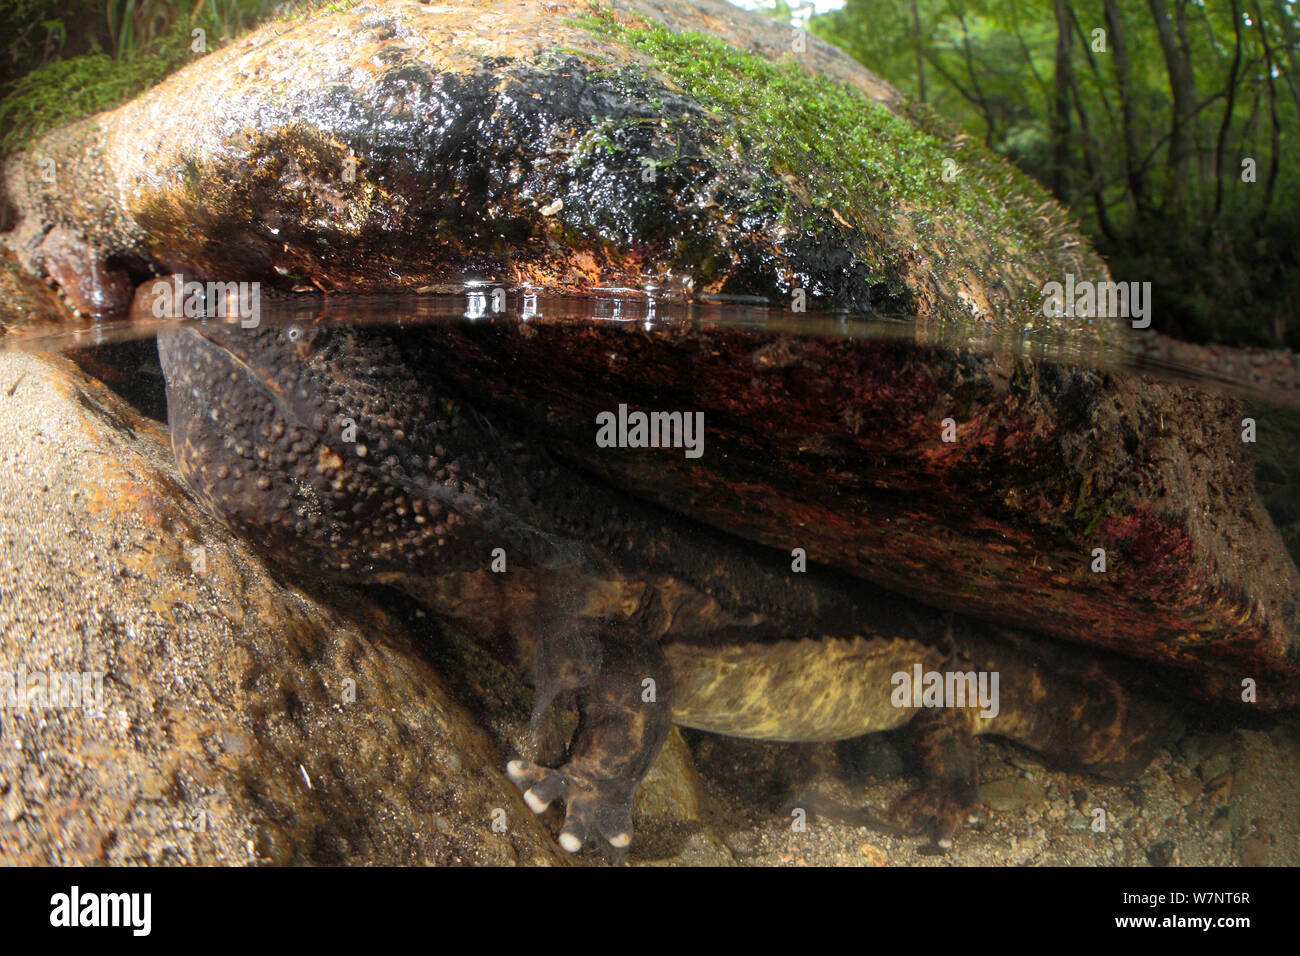 Japanese giant salamander (Andrias japonicus) coming up to breathe, Hino River, Tottori, Japan, August. Stock Photo